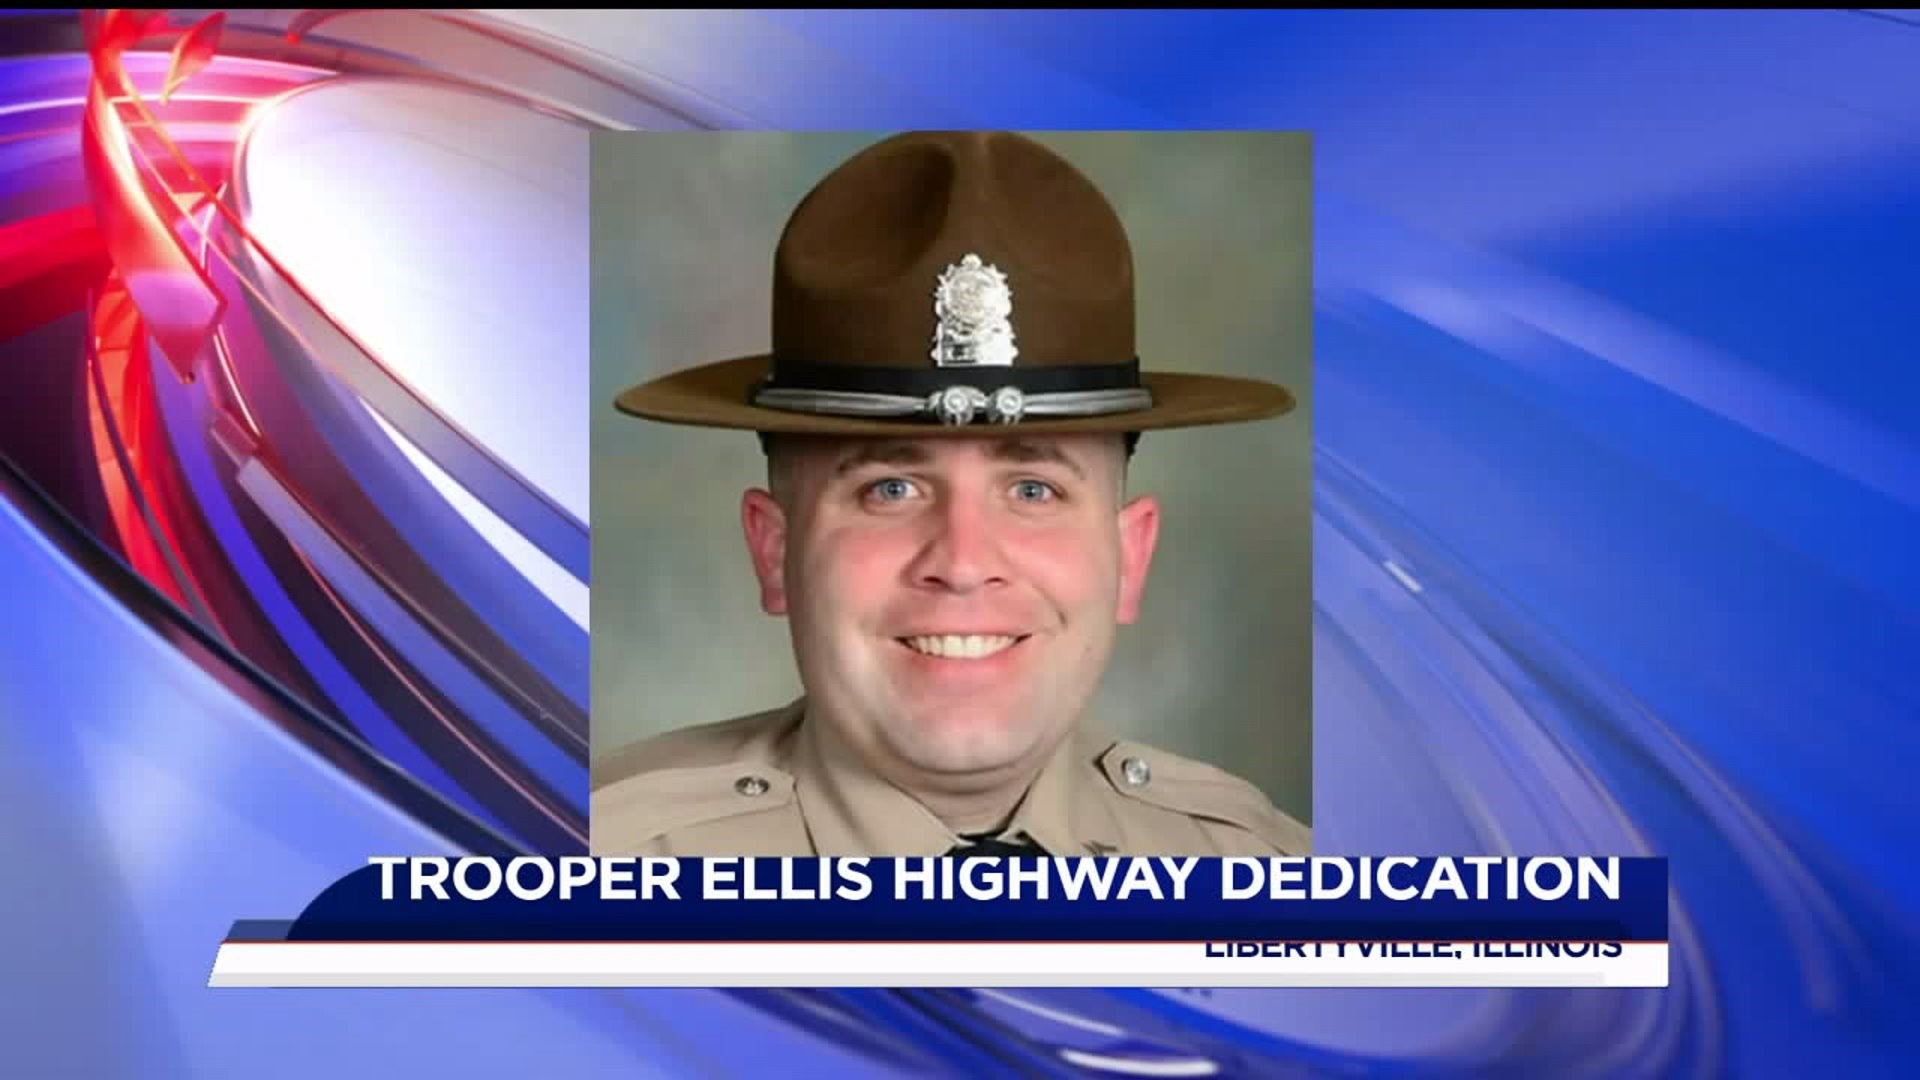 Stretch of highway to be named in honor of fallen Illinois trooper